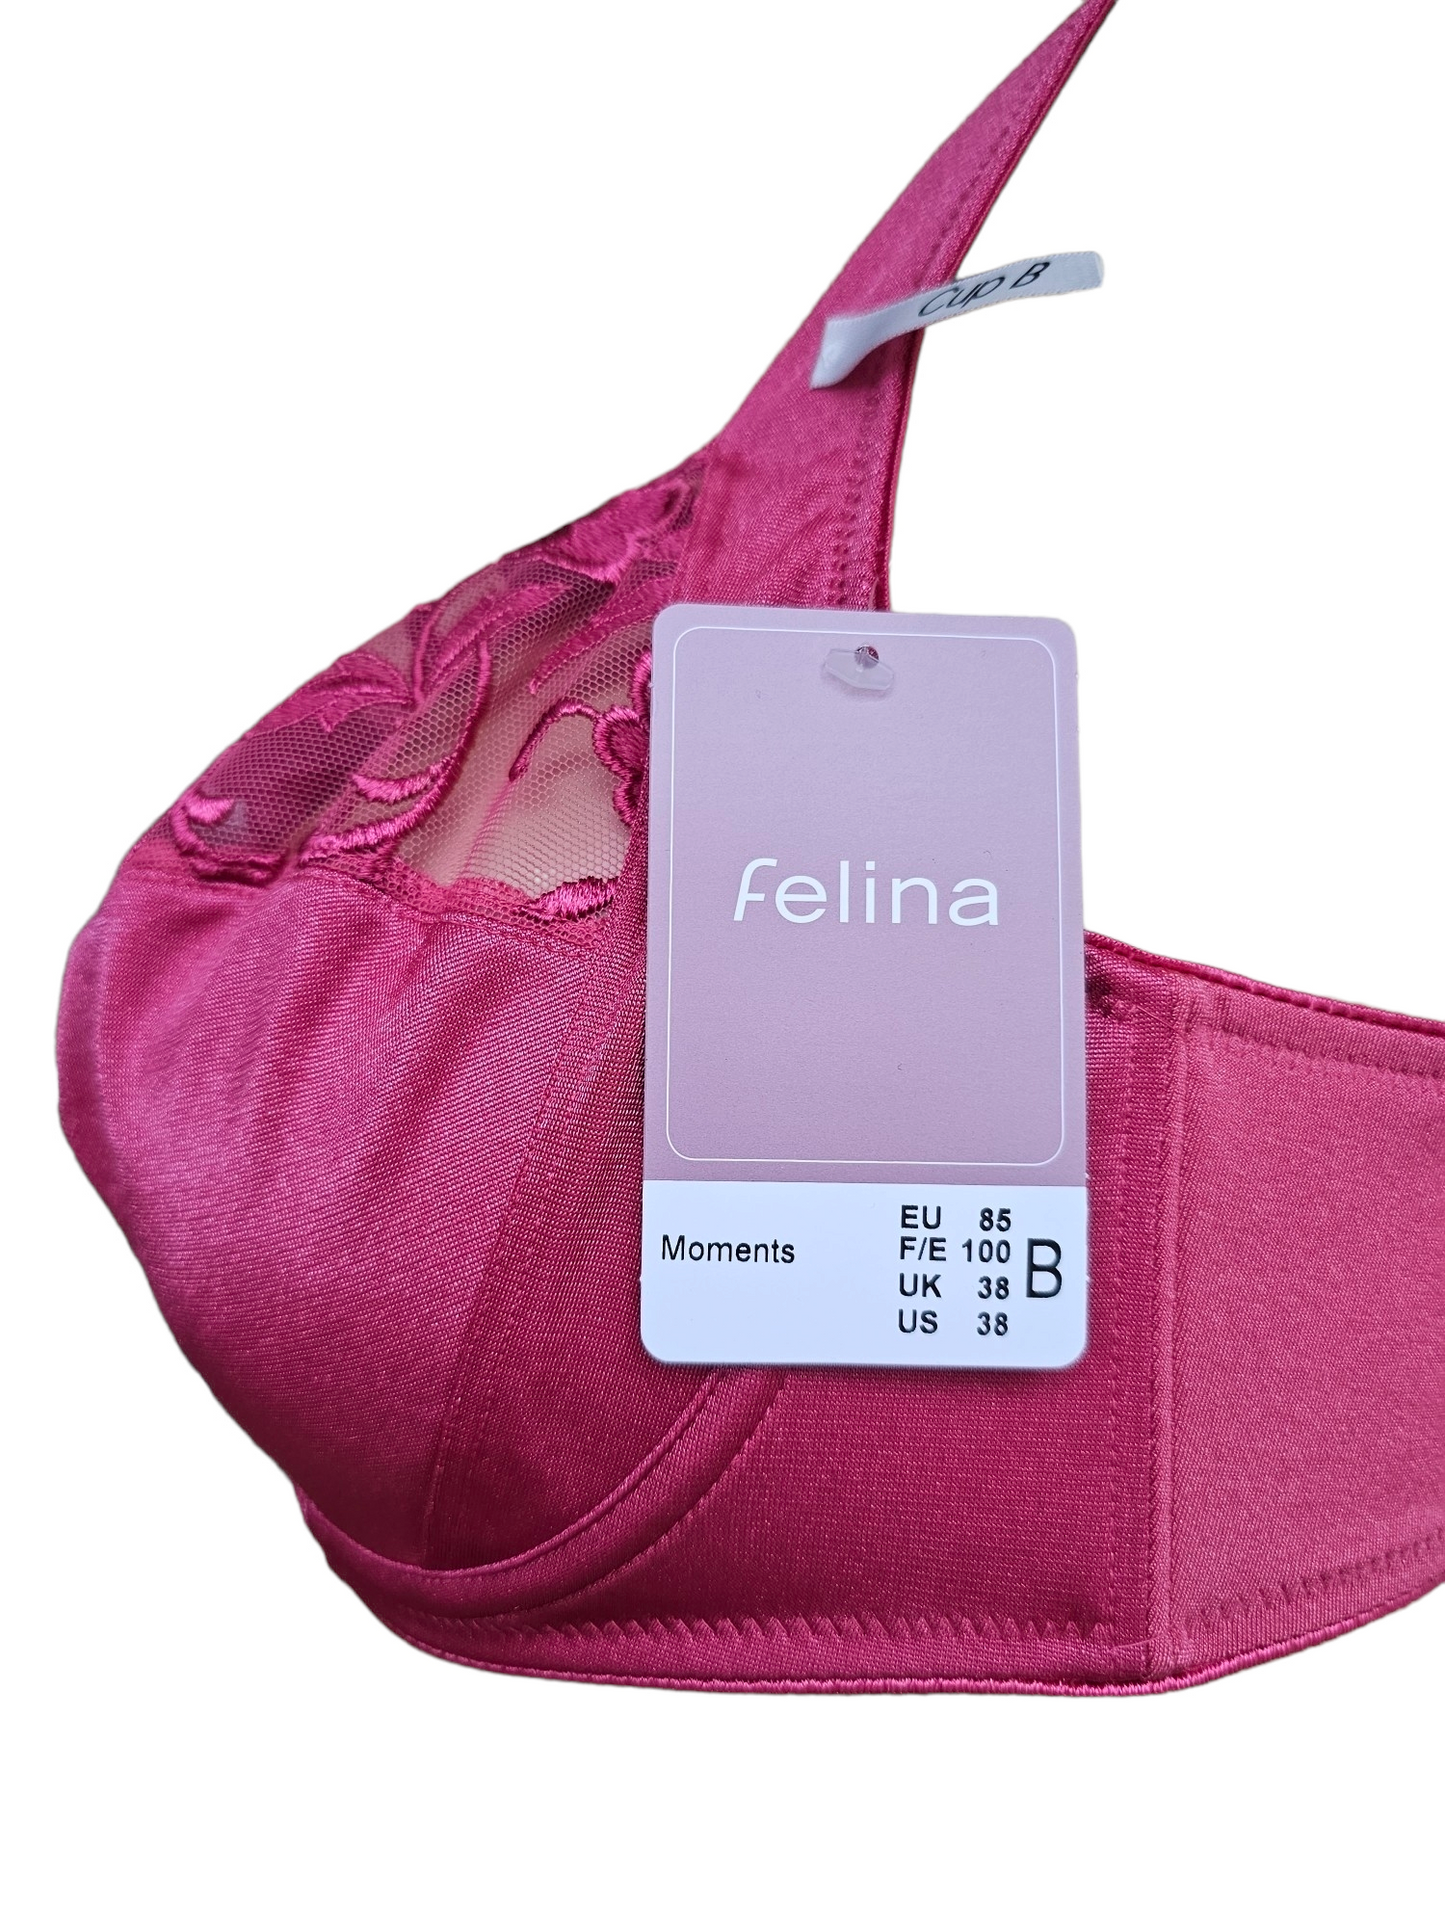 Felina - Moments Barberry beugel bh